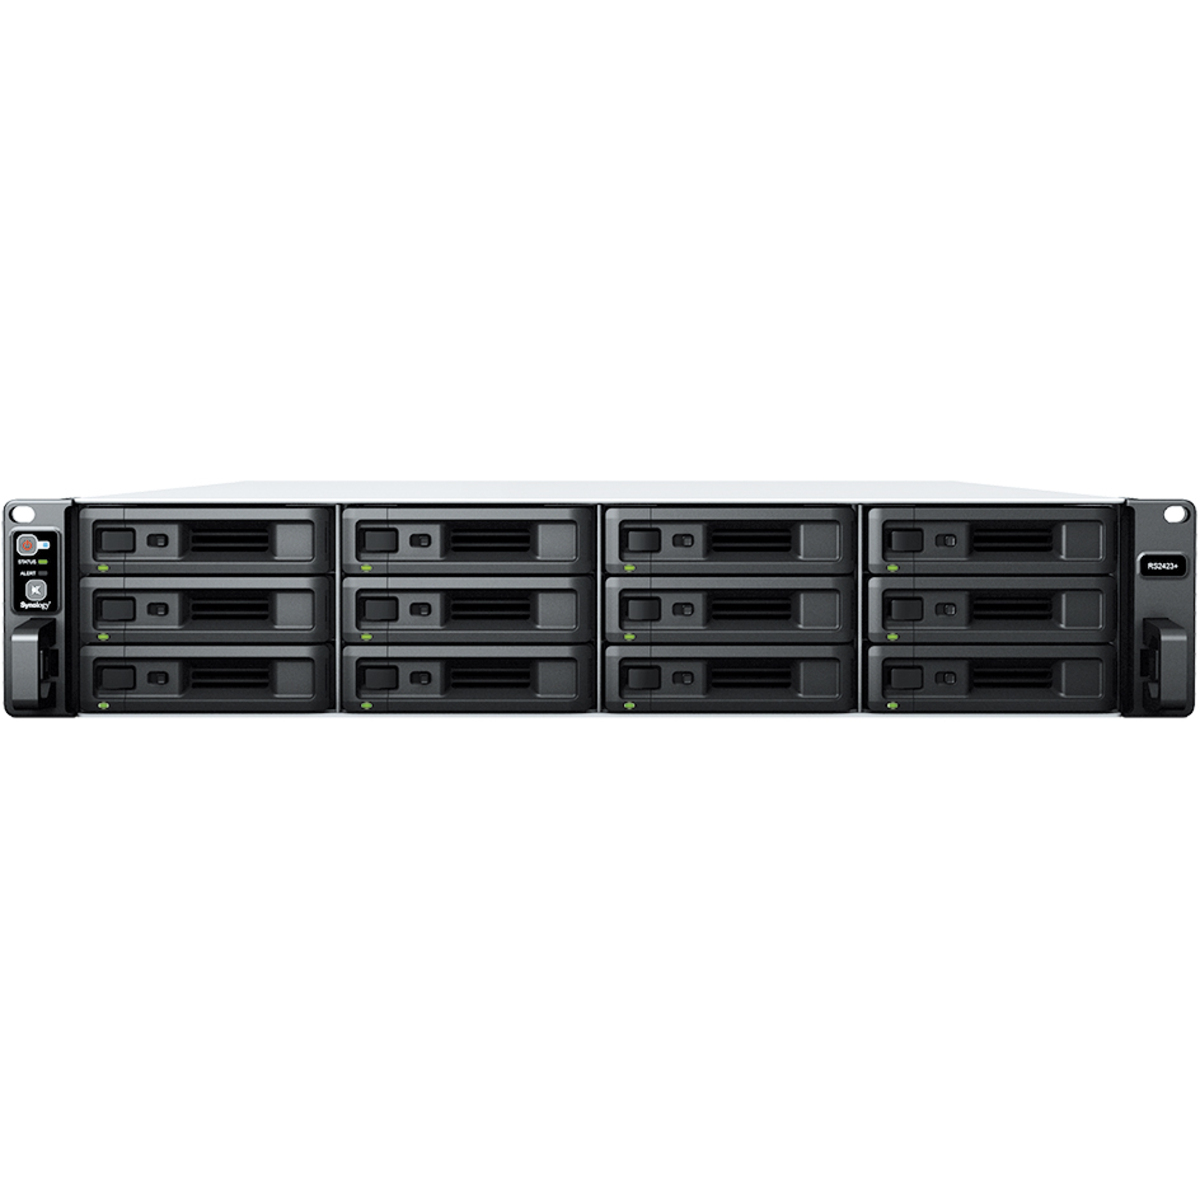 Synology RackStation RS2423+ RackMount 12-Bay Multimedia / Power User / Business NAS - Network Attached Storage Device Burn-In Tested Configurations RackStation RS2423+